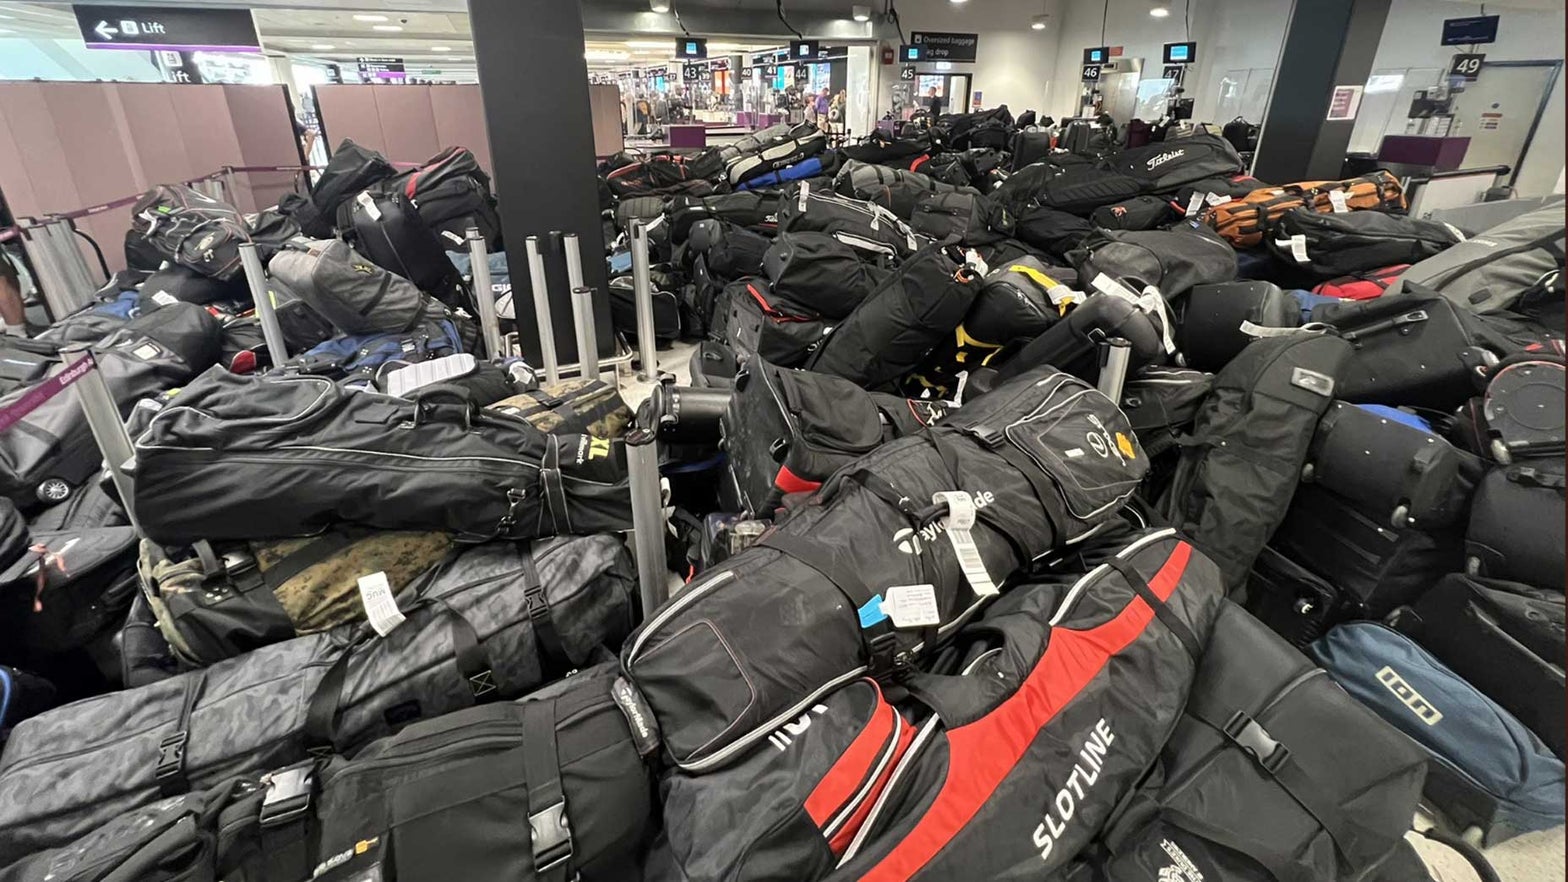 Golf luggage piling up at U.Okay. airports after Open Championship